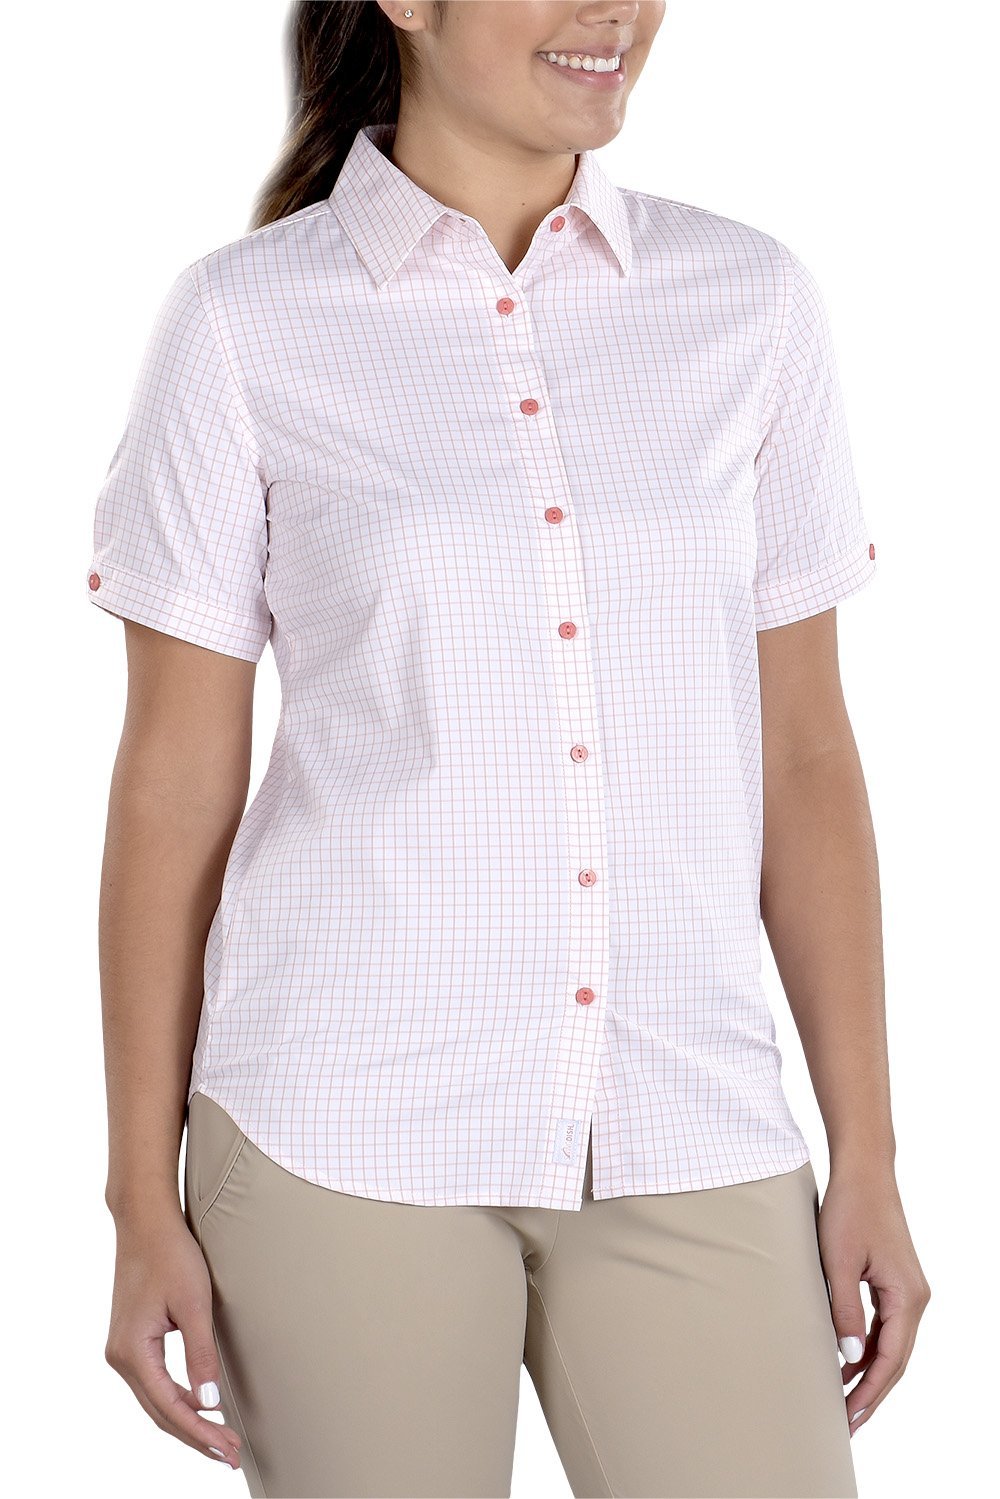 Caitlyn Dusty Pink Stretch Button Up Short Sleeve